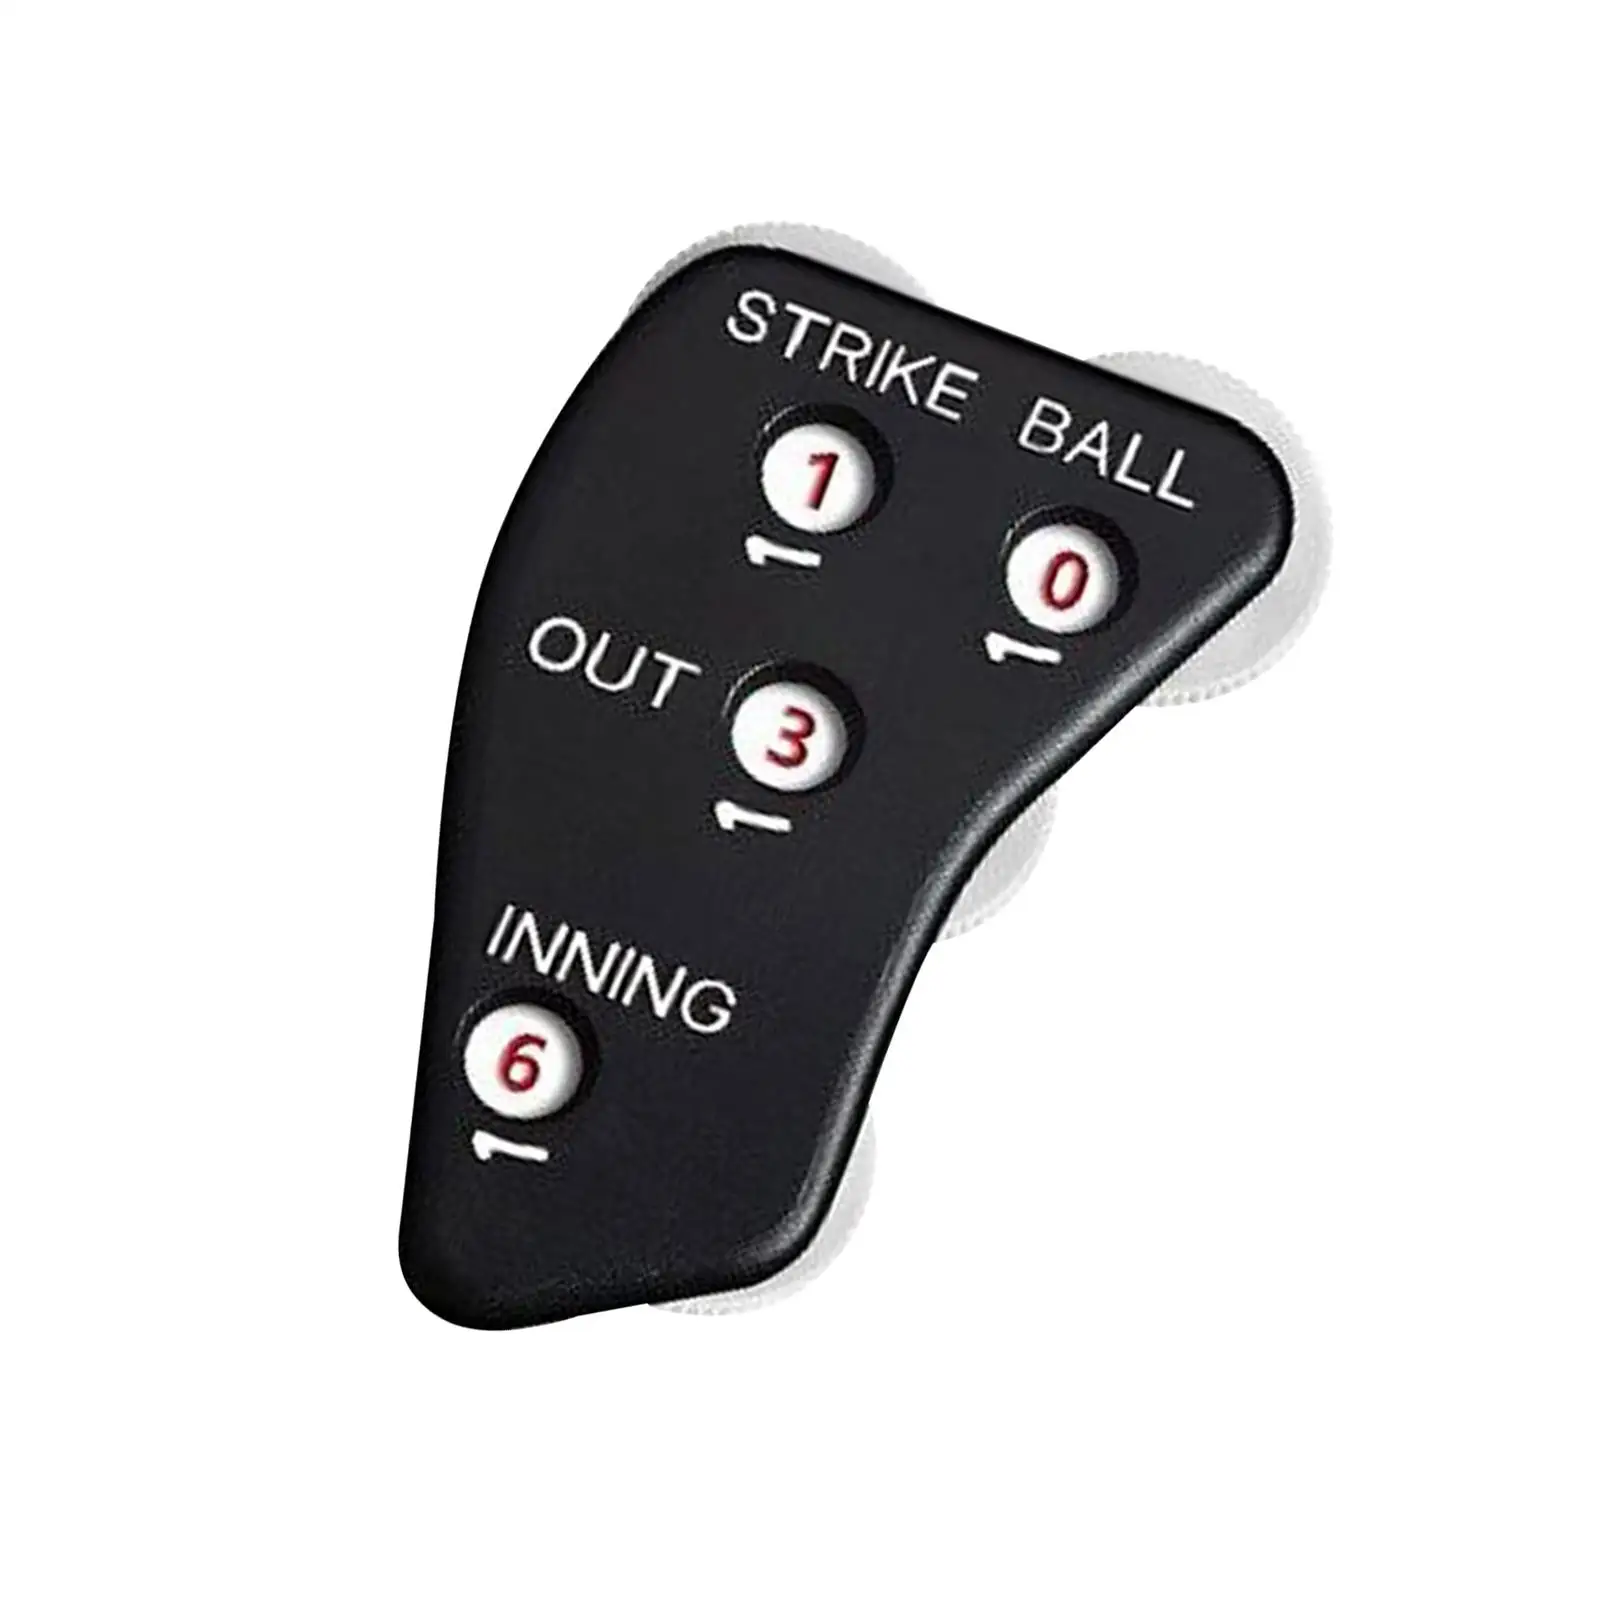 Baseball Umpire Non Slip Surface Supplies Referee Device Umpire Indicator 4 Dial for Ball Strike Innings Outs